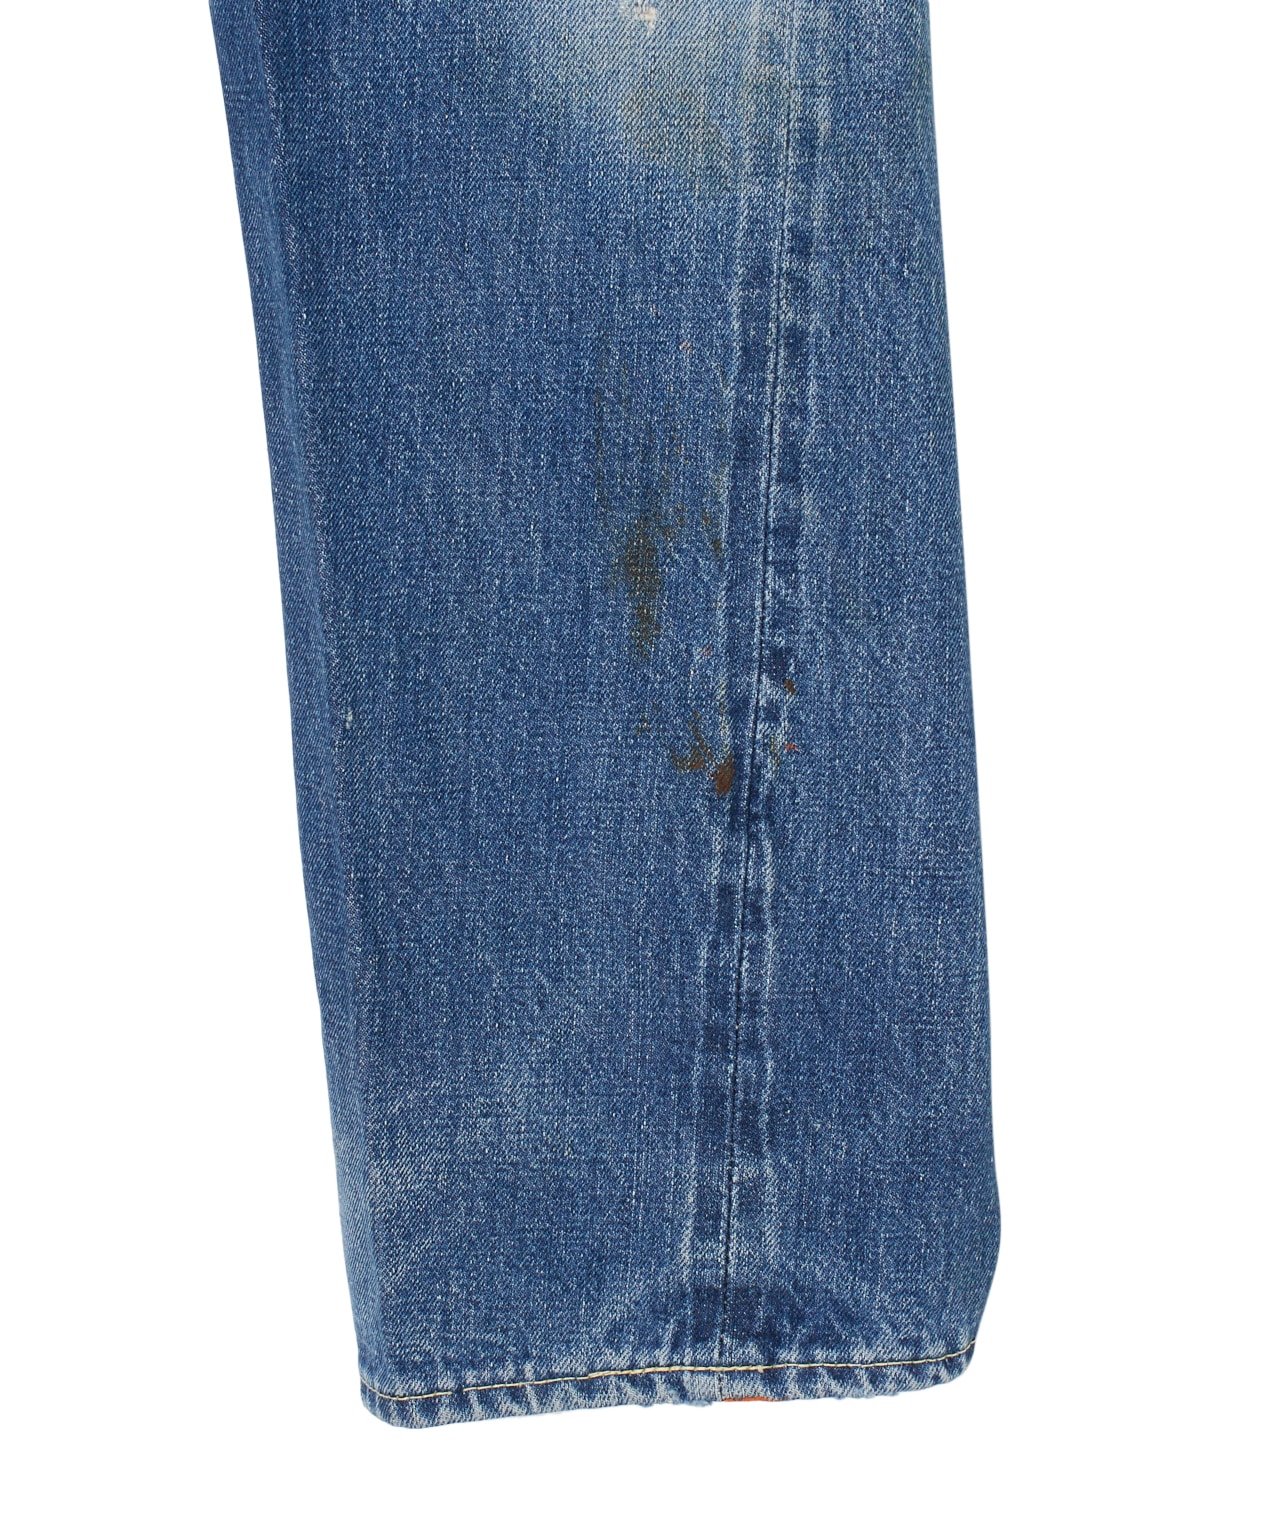 USED/LEVI'S 502 BIG E AS-IS 詳細画像 BLUE 6